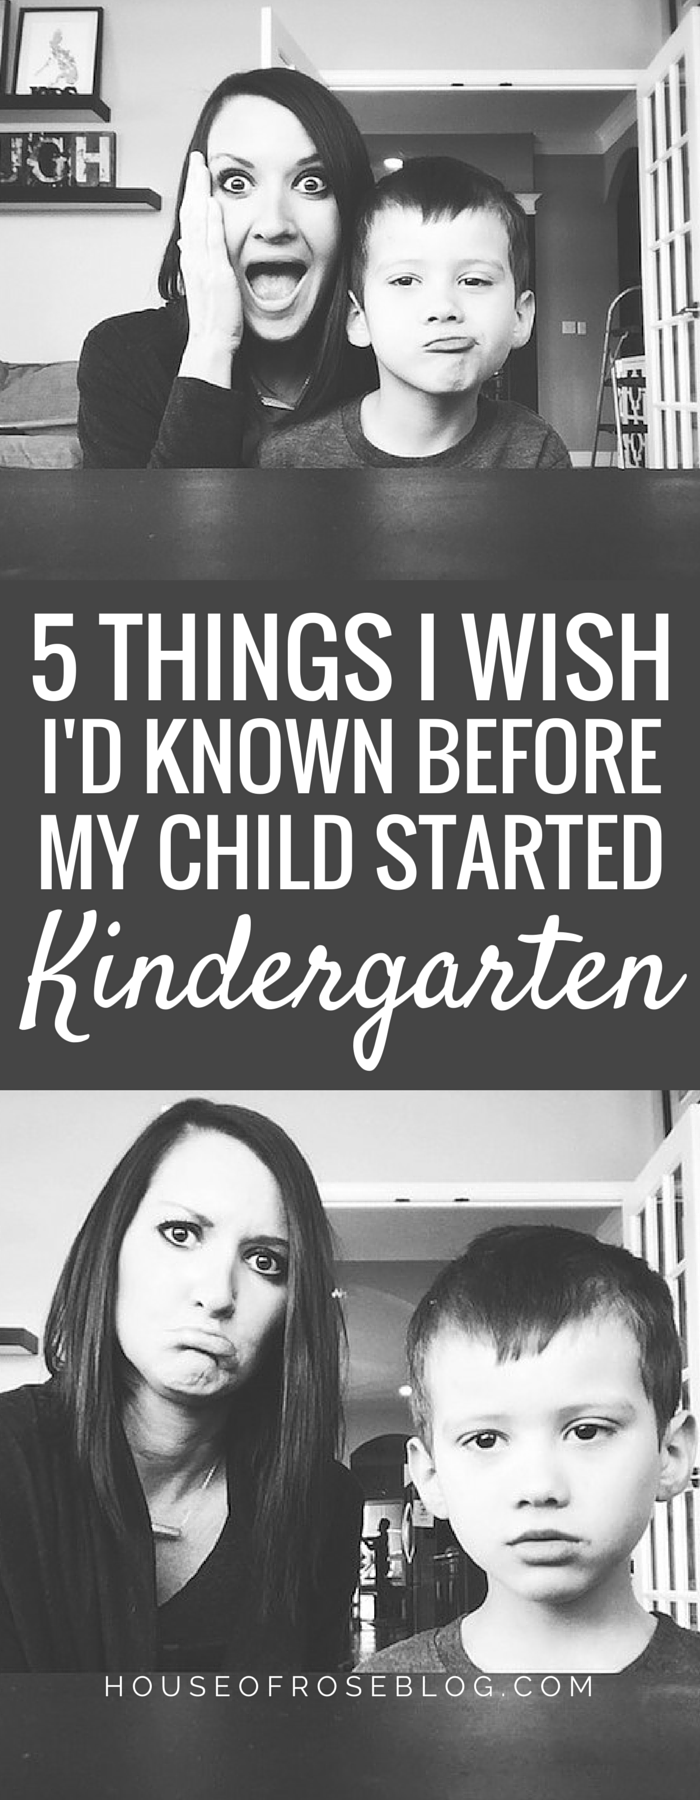 5 Things I Wish I'd Known Before My Child Started Kindergarten by HouseofRoseBlog.com